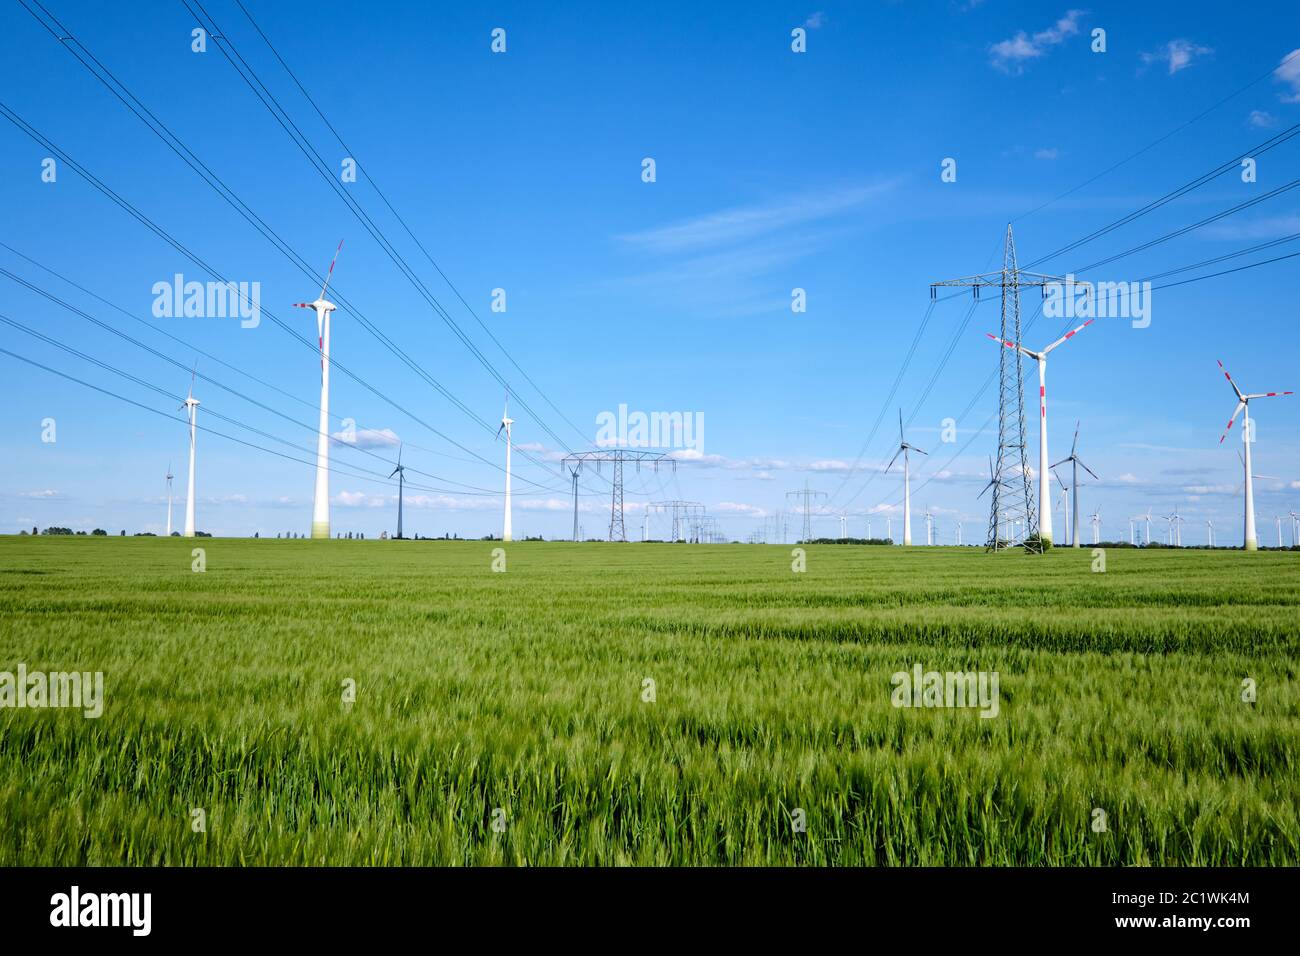 Wind turbines and power lines in a corn field seen in Germany Stock Photo